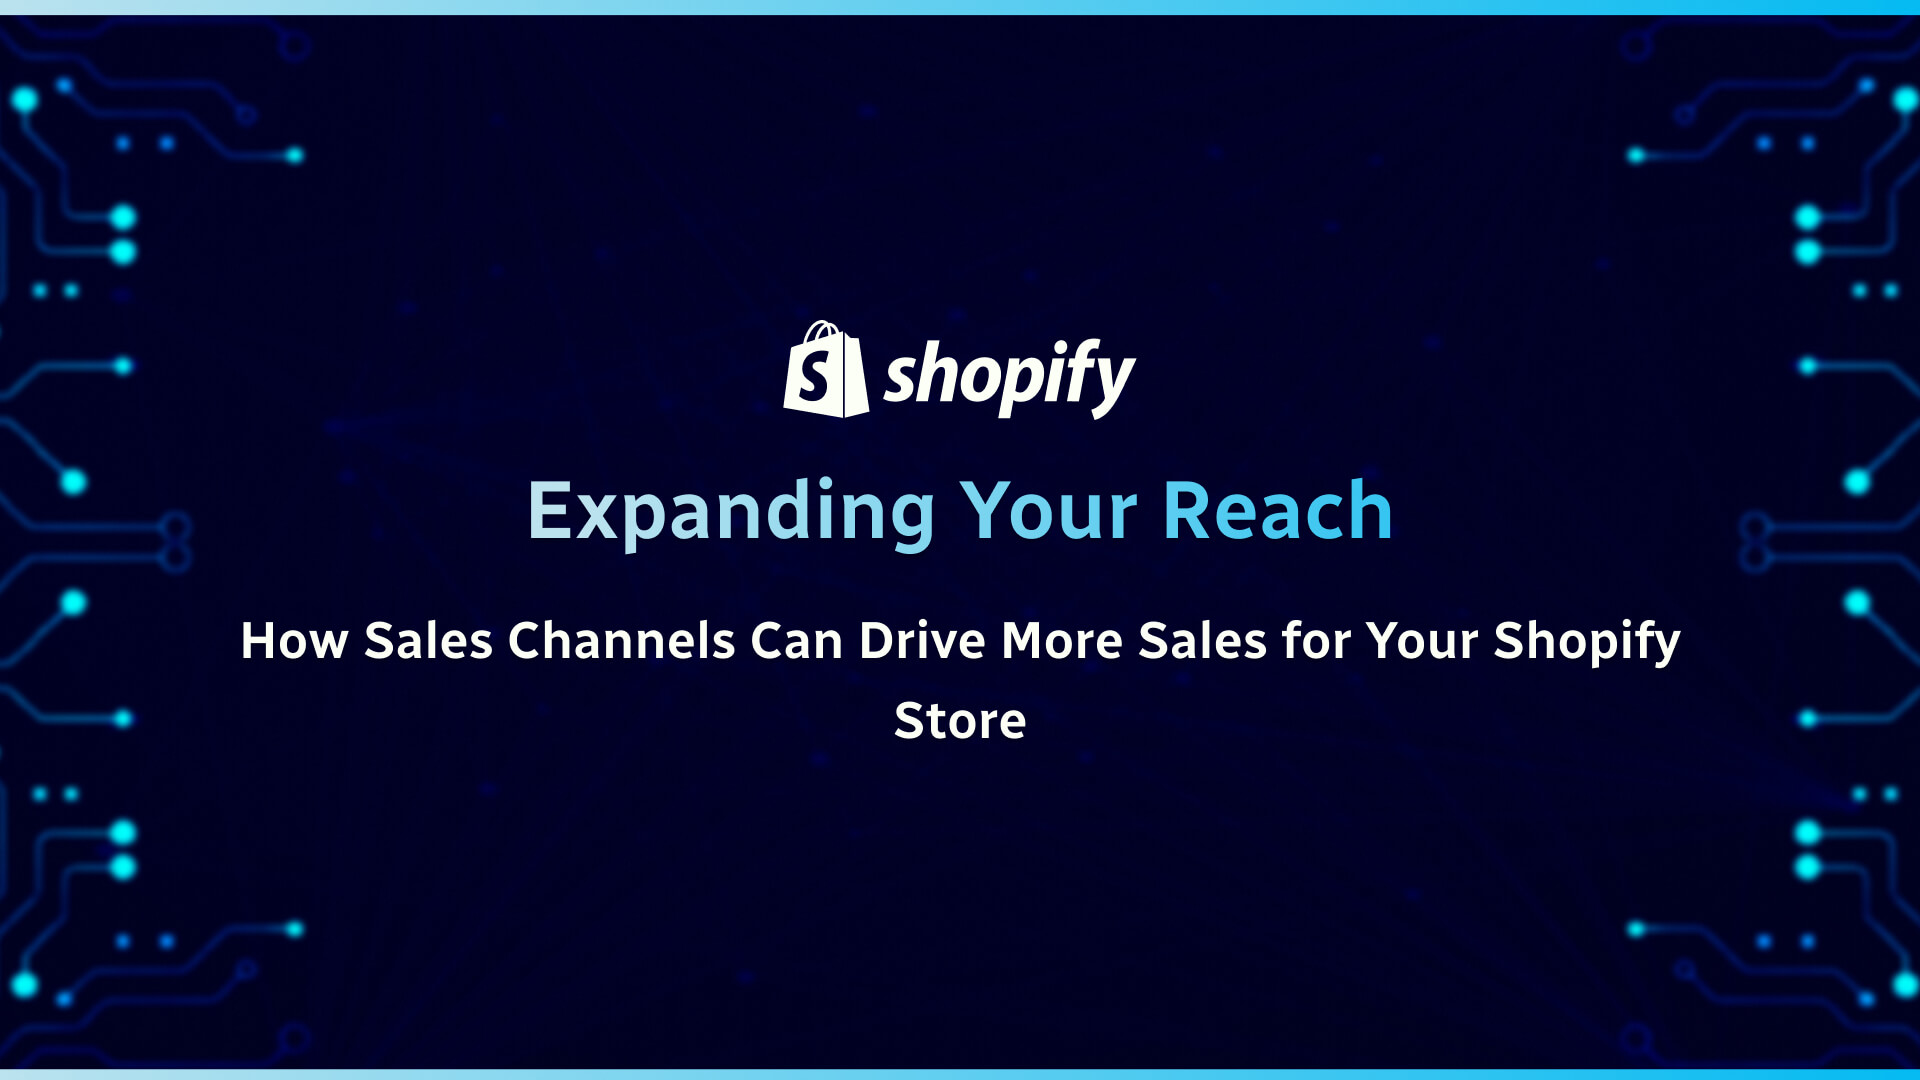 Expanding Your Reach: How Sales Channels Can Drive More Sales for Your Shopify Store